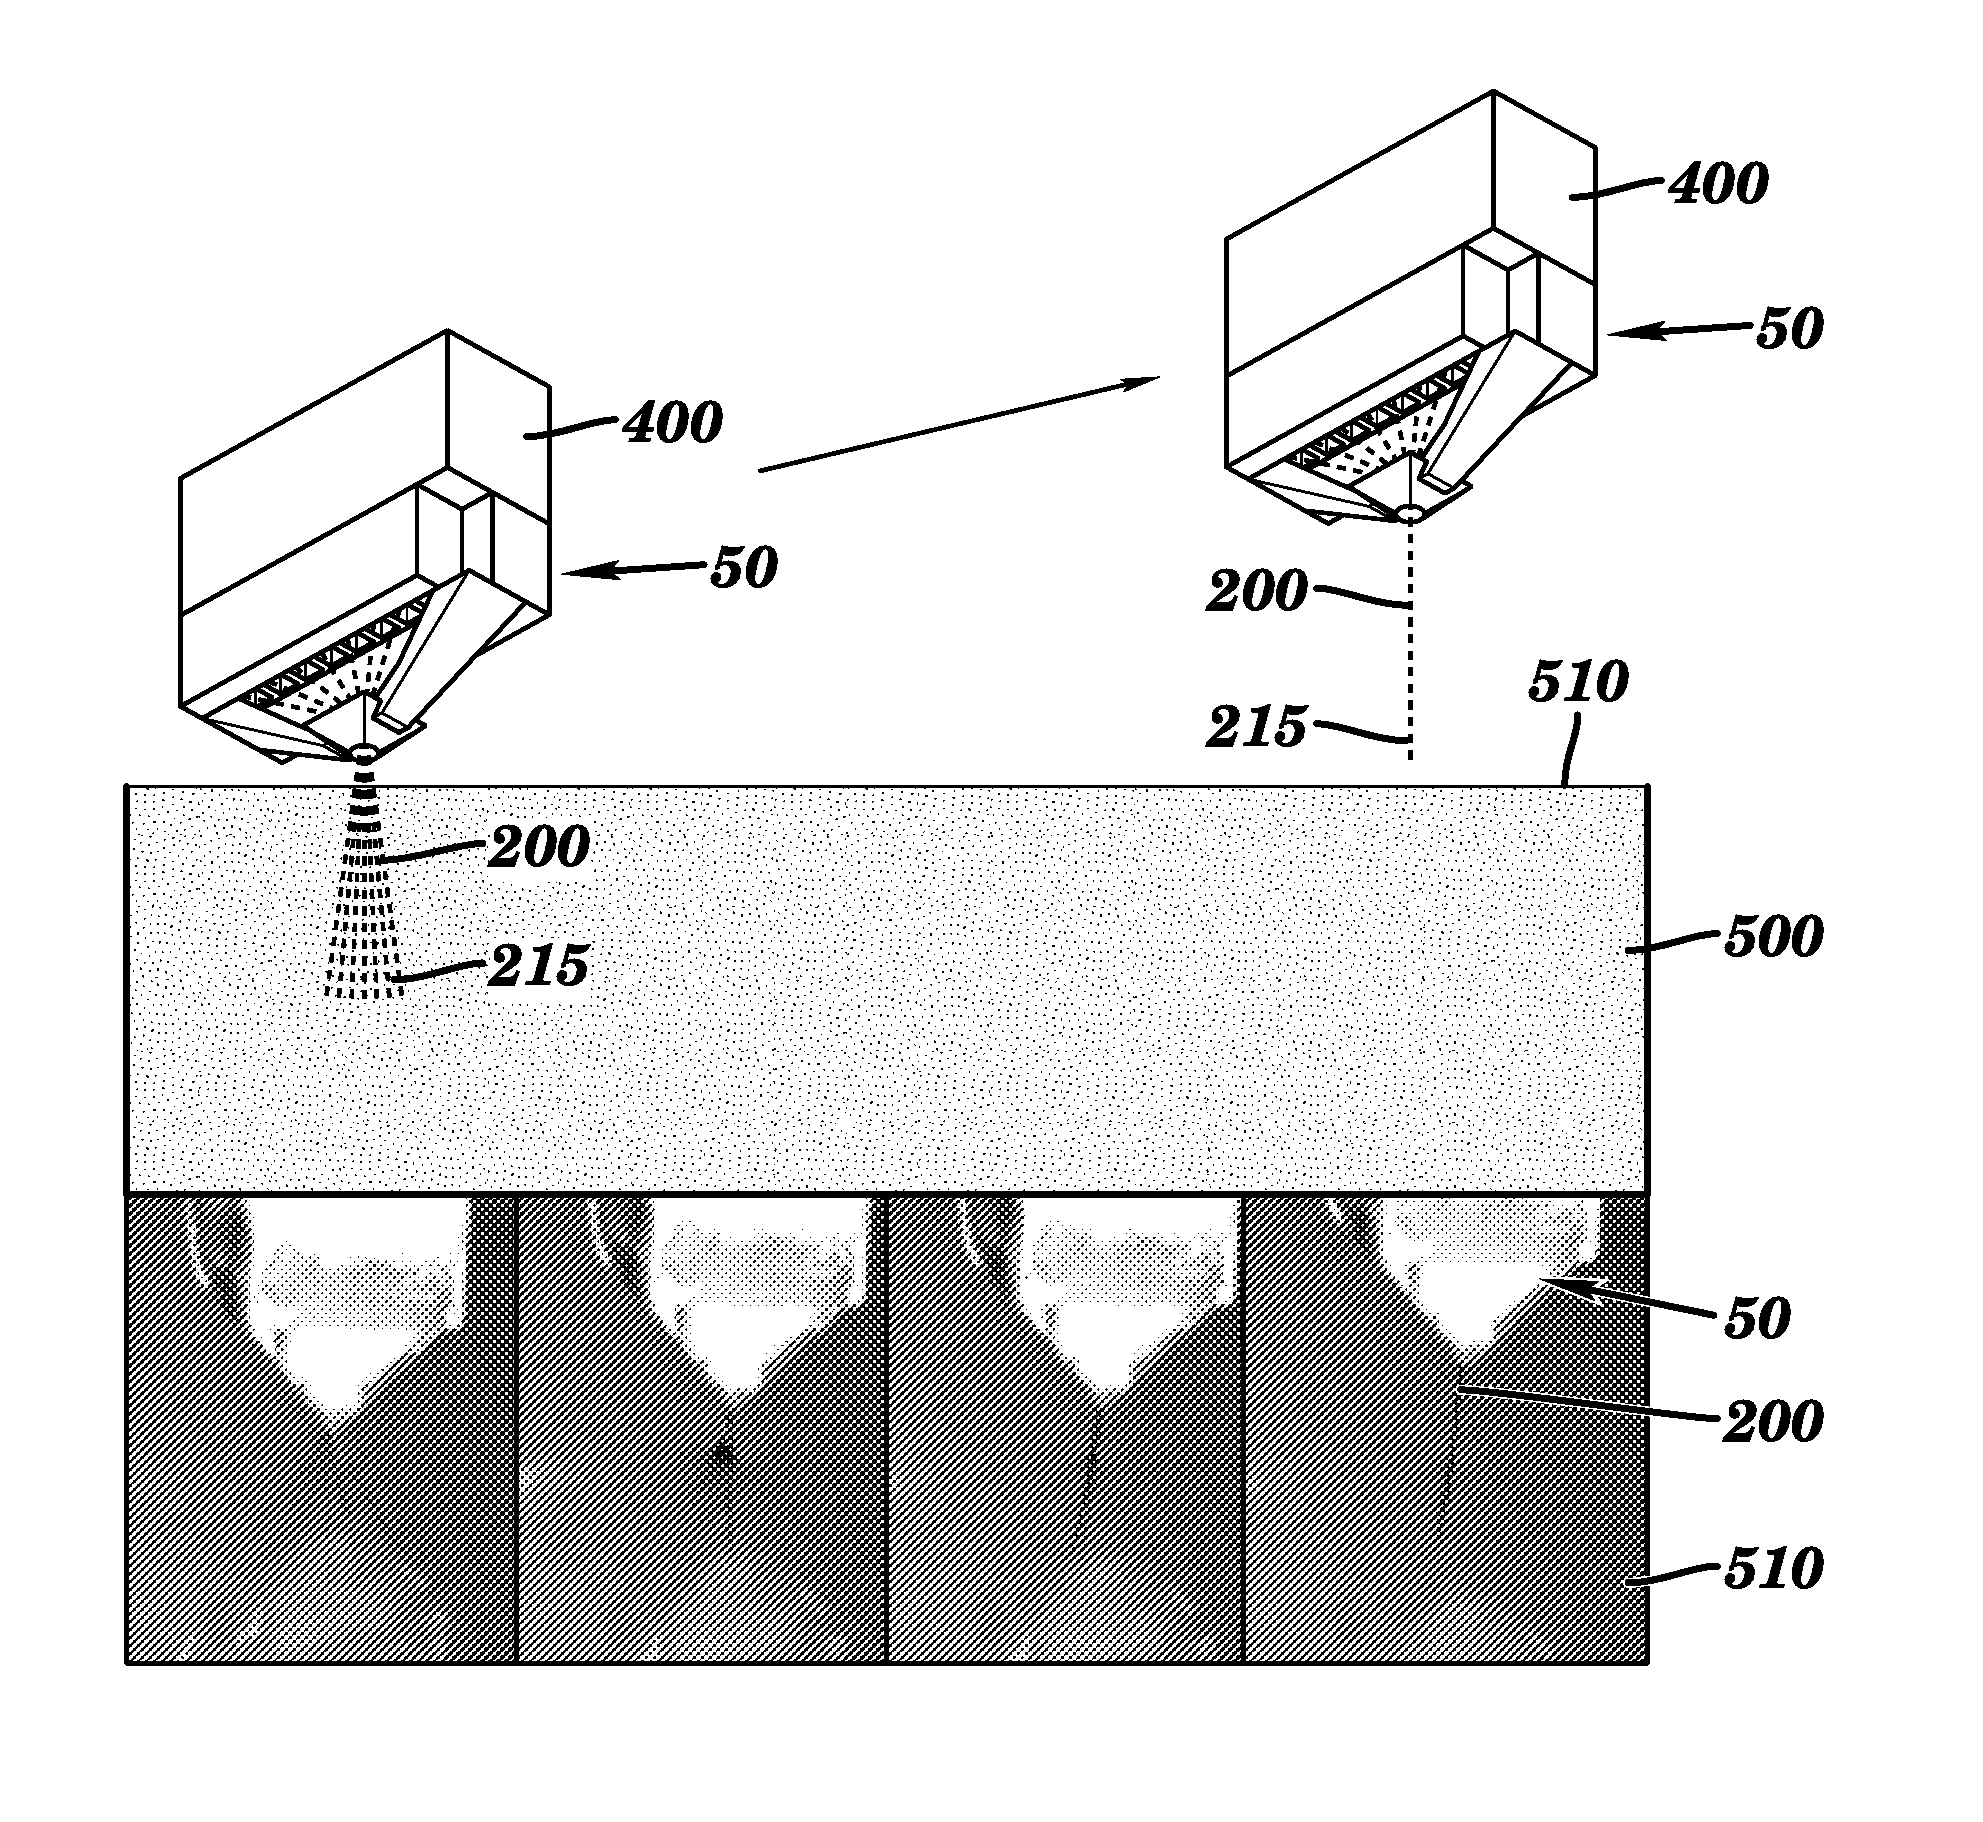 Minimally invasive splaying microfiber electrode array and methods of fabricating and implanting the same